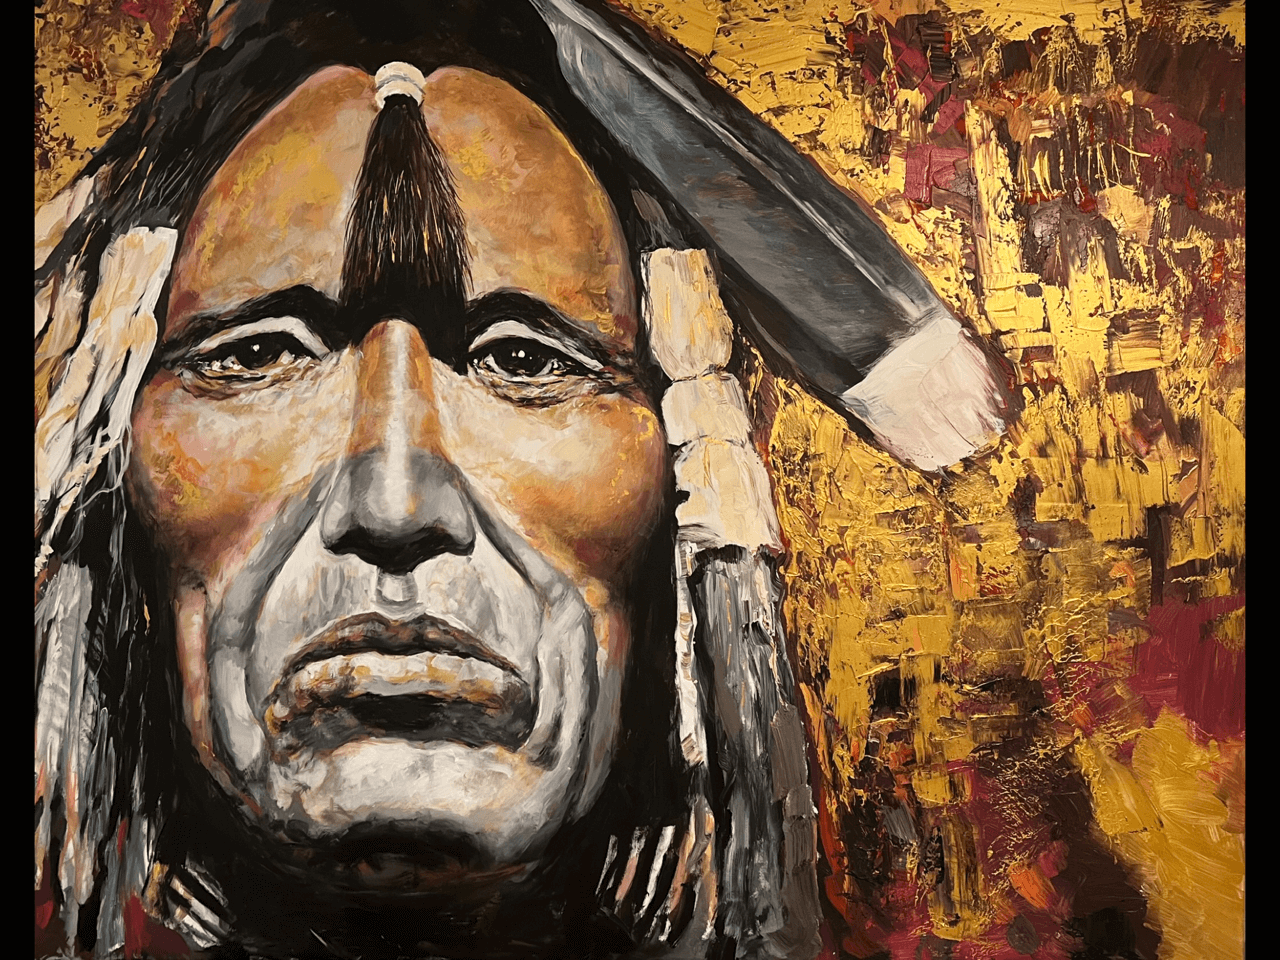 West Coast Native Portrait: Striking painted face adorned with an eagle feather against a vibrant yellow background, available for sale at Paul Ygartua's Gallery.